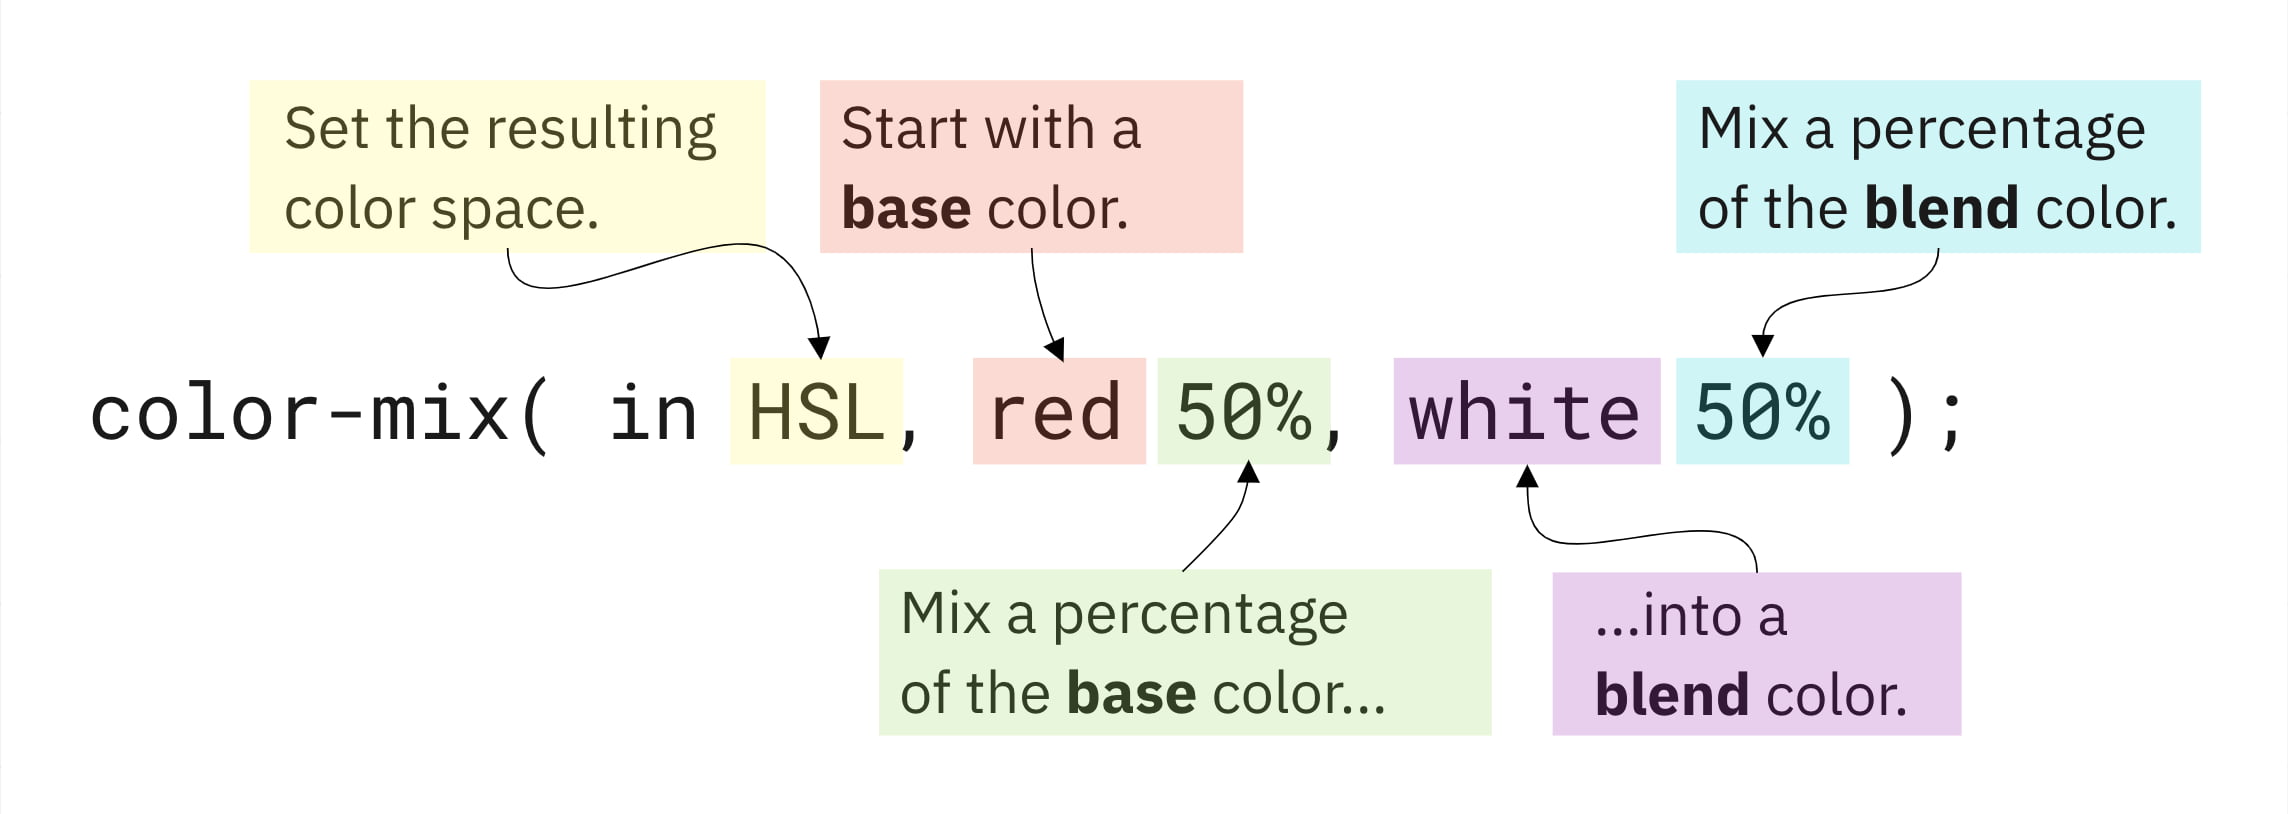 Mixed source. Color Mixer. CSS Color change between Sections.